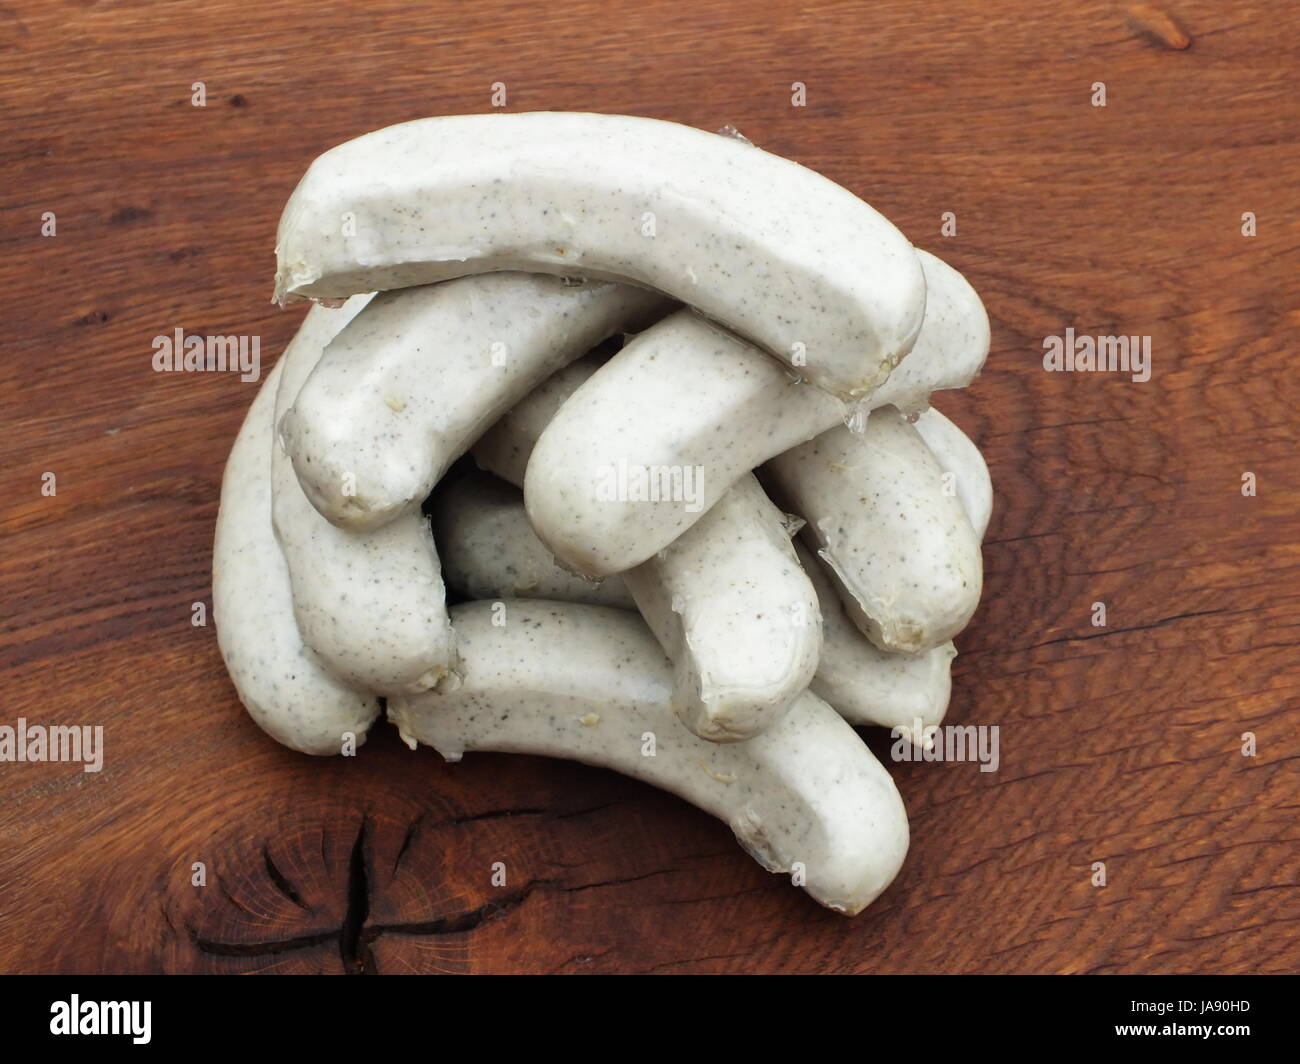 raw, homemade, meat, food, aliment, rough, raw, parsley, sausages, homemade, Stock Photo